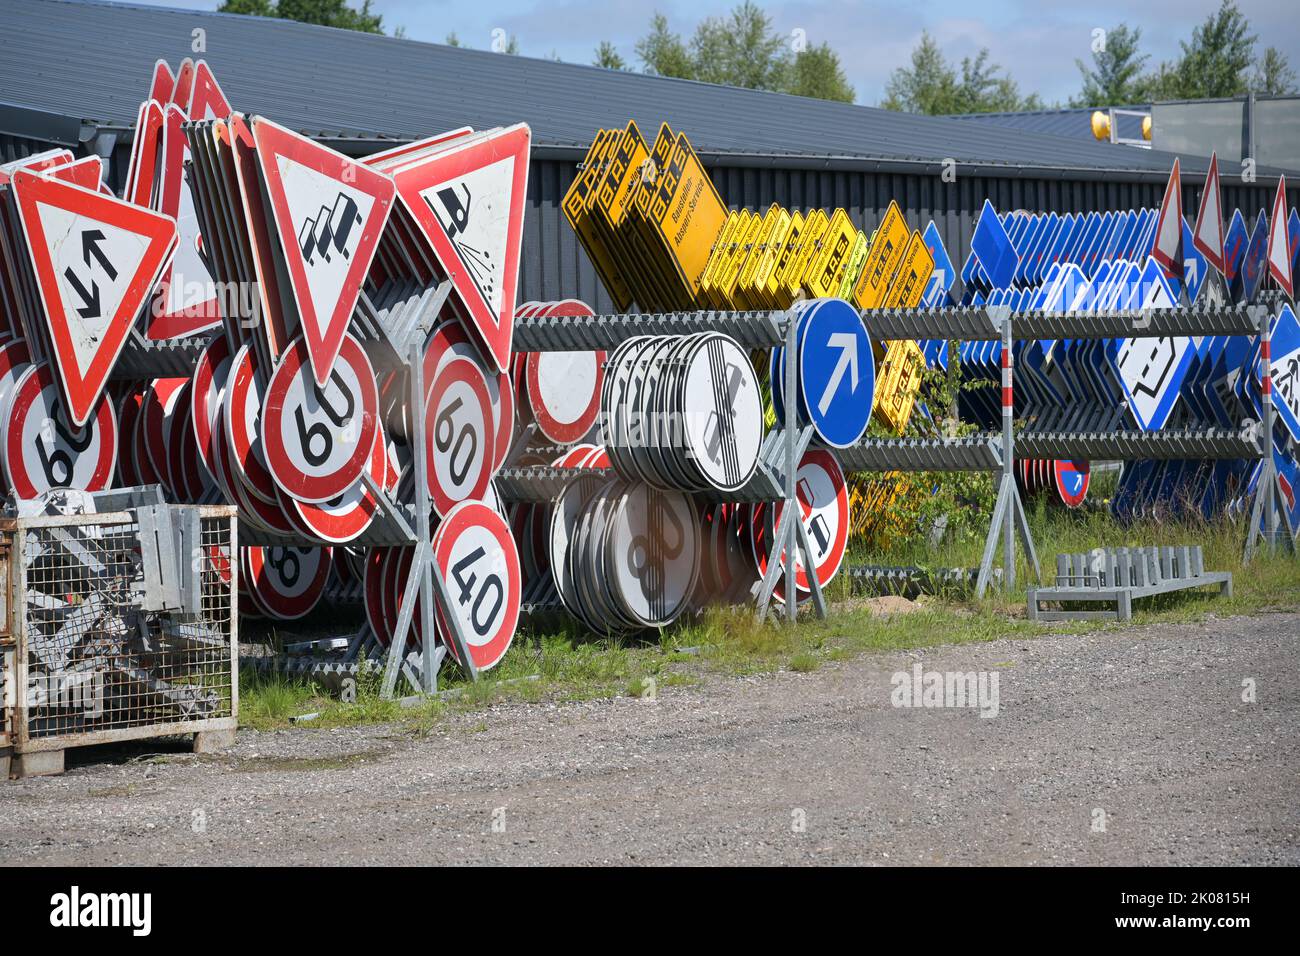 Neumunster, Germany, June 4, 2022: Traffic sings on racks on the storage area, selected focus, editorial Stock Photo